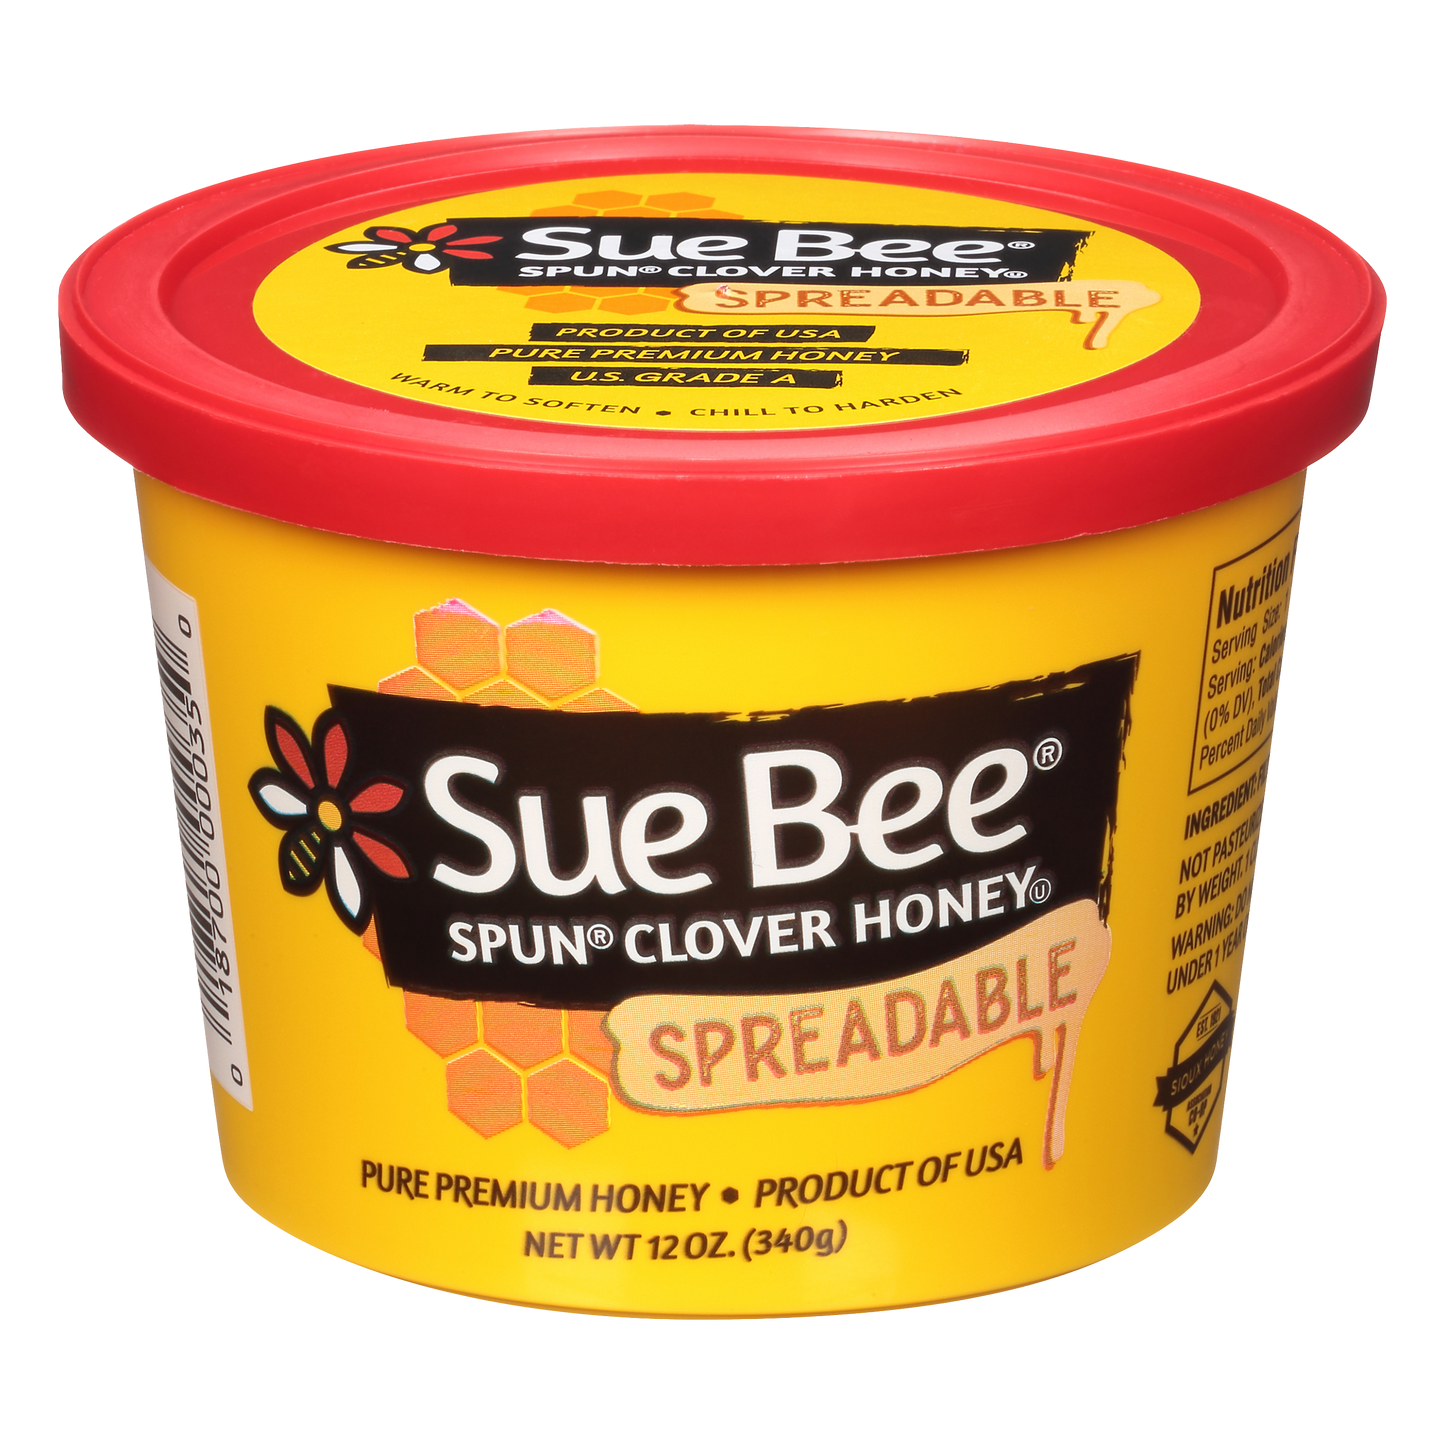 Sue Bee Spun USA Clover Honey, 12 Ounce (Pack of 6) Sue Bee Pure Premium Clover Honey From USA Beekeepers